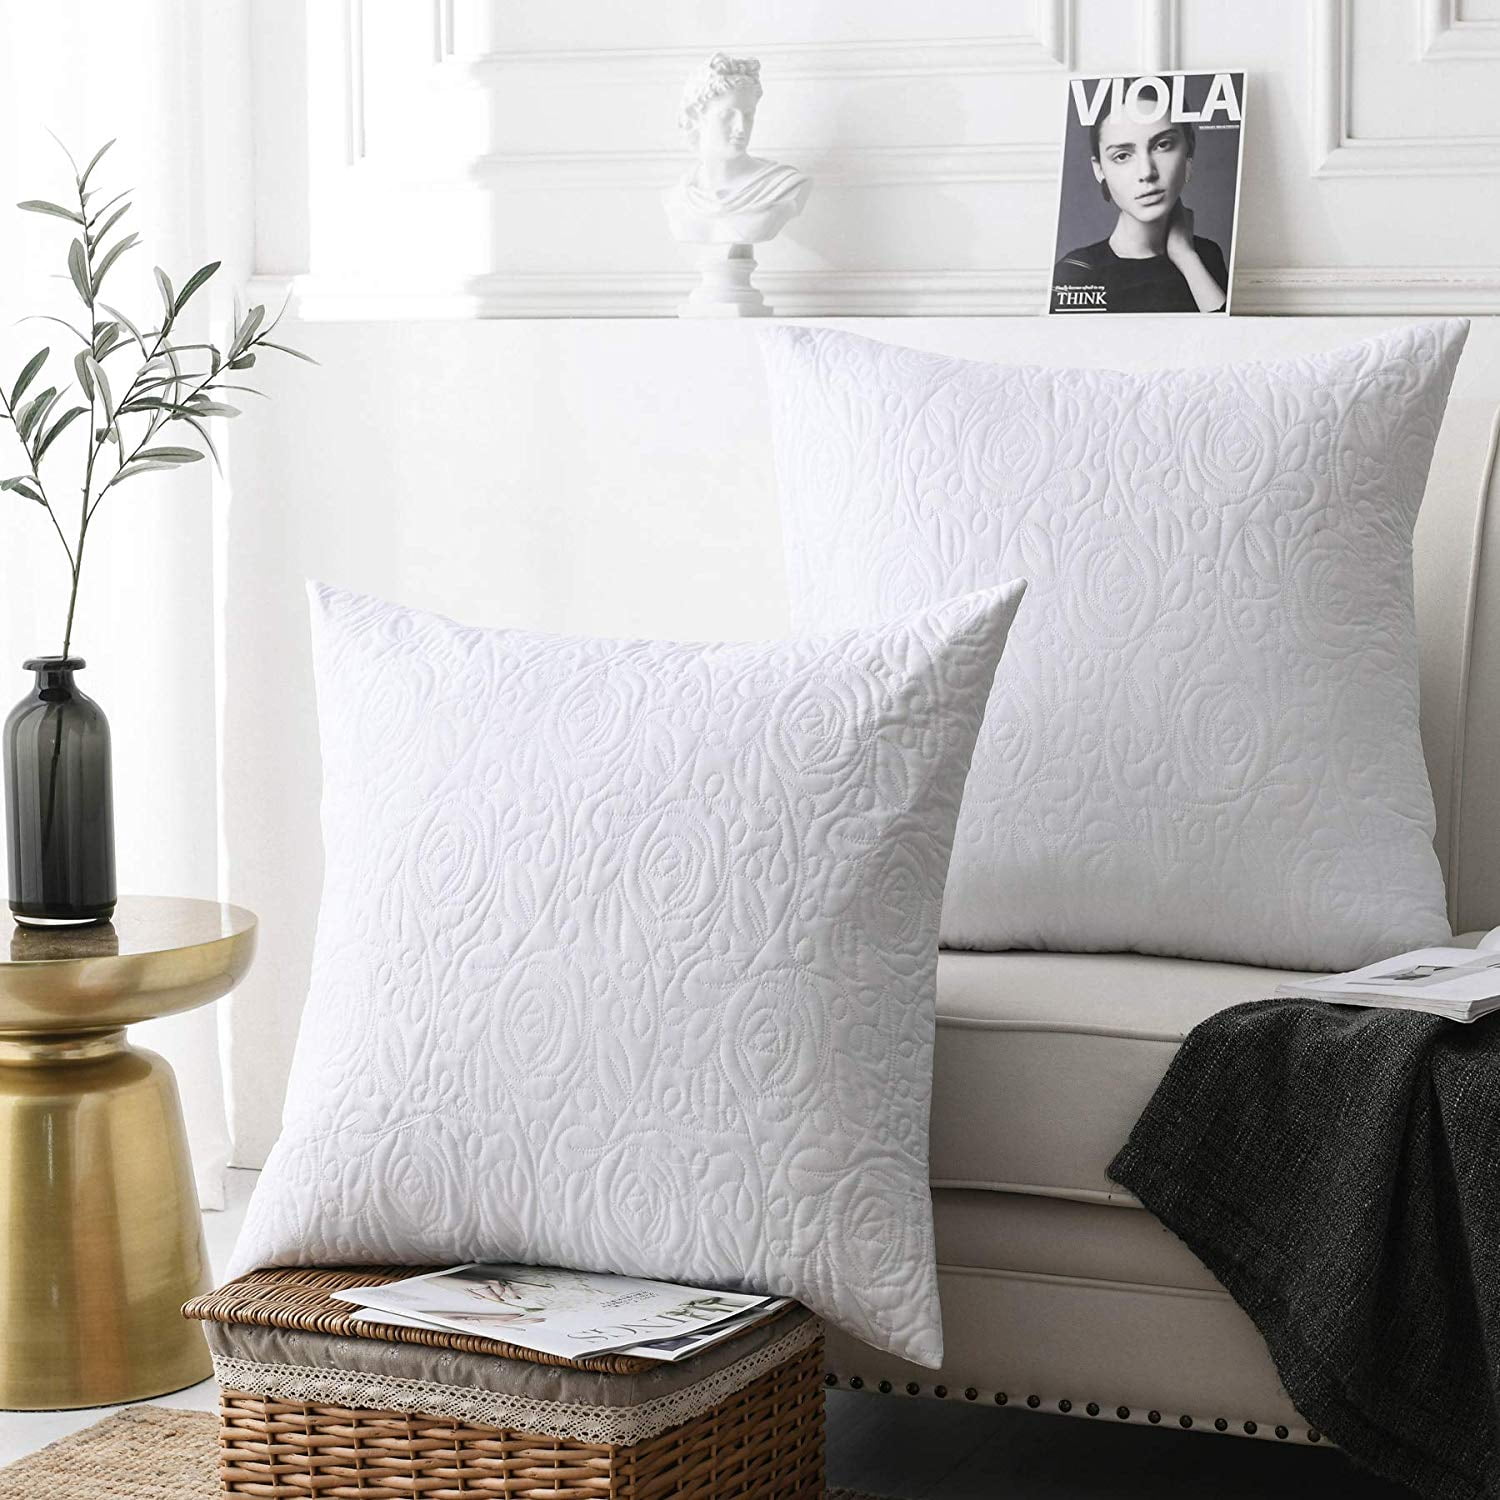 Aiking Home Pillow Covers set of 2 26x26 Inches Cotton Euro shams 